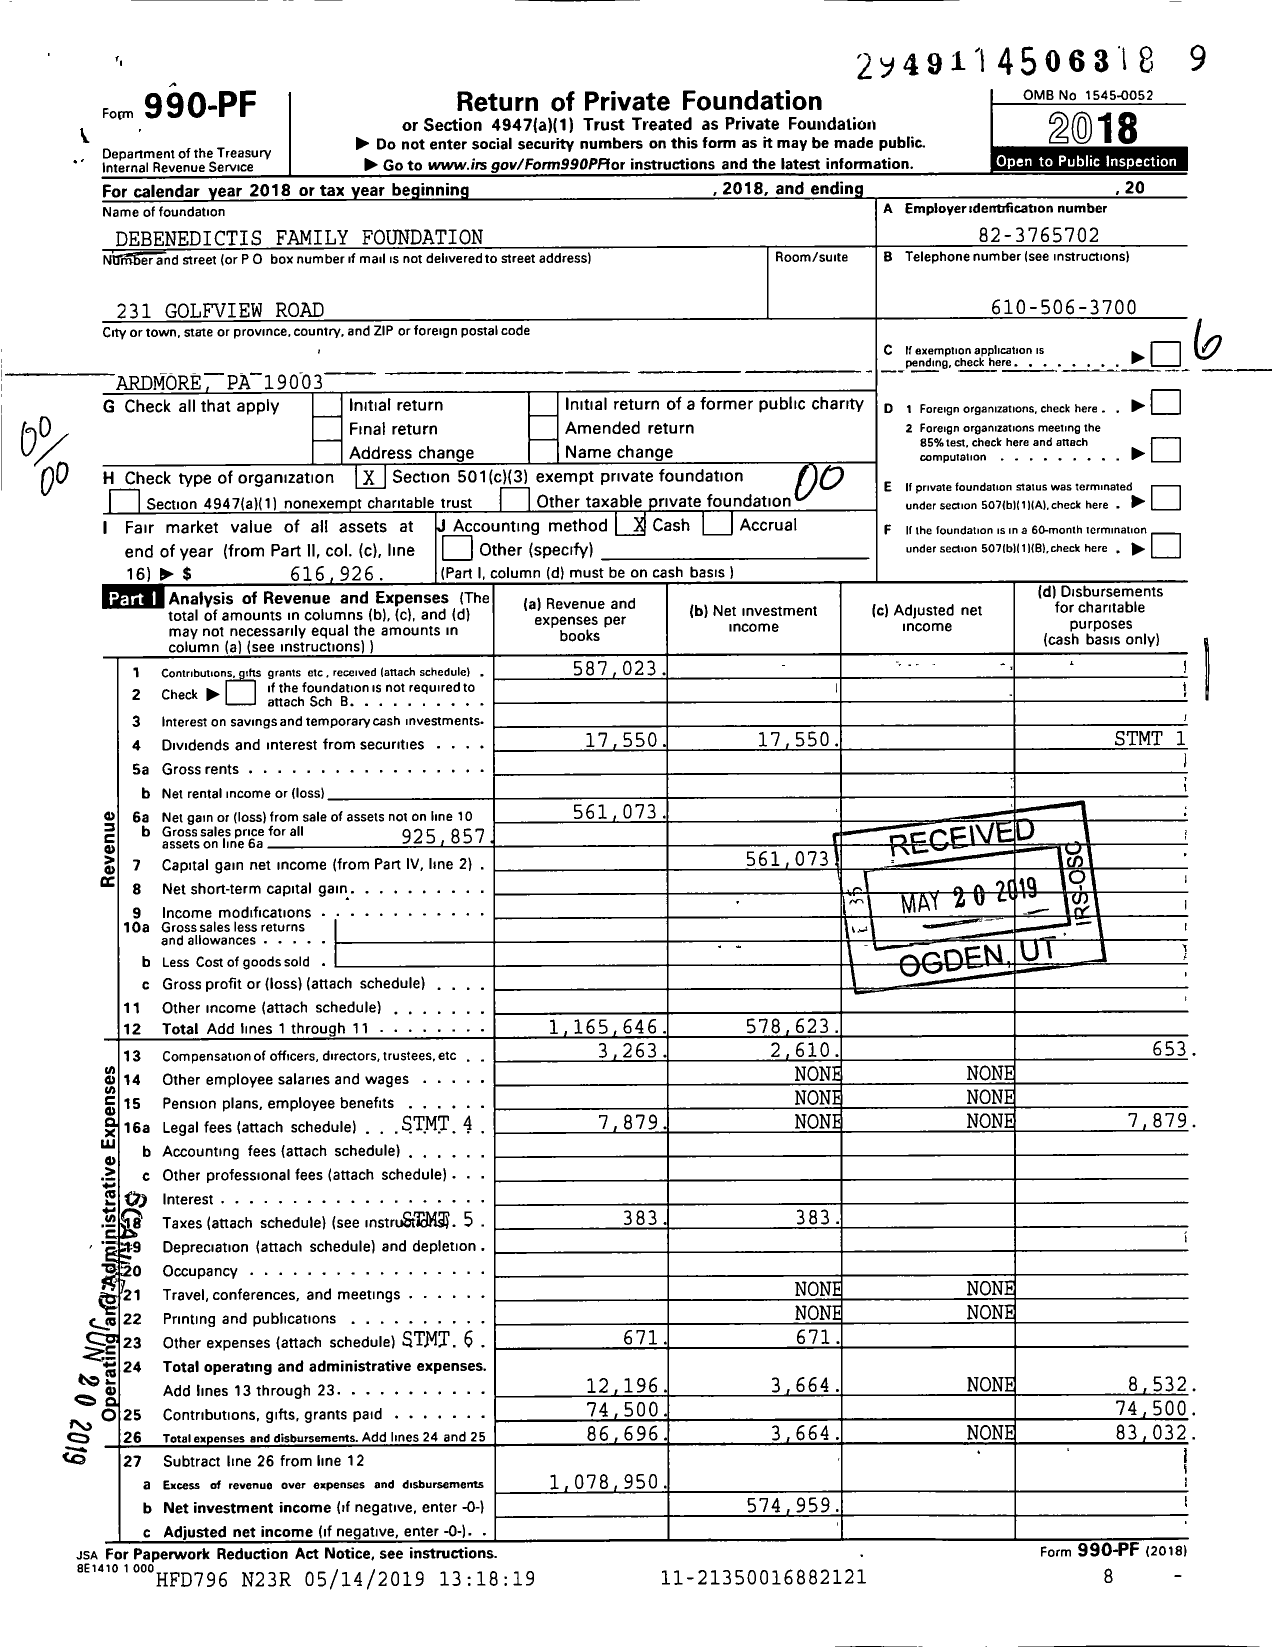 Image of first page of 2018 Form 990PF for Debenedictis Family Foundation